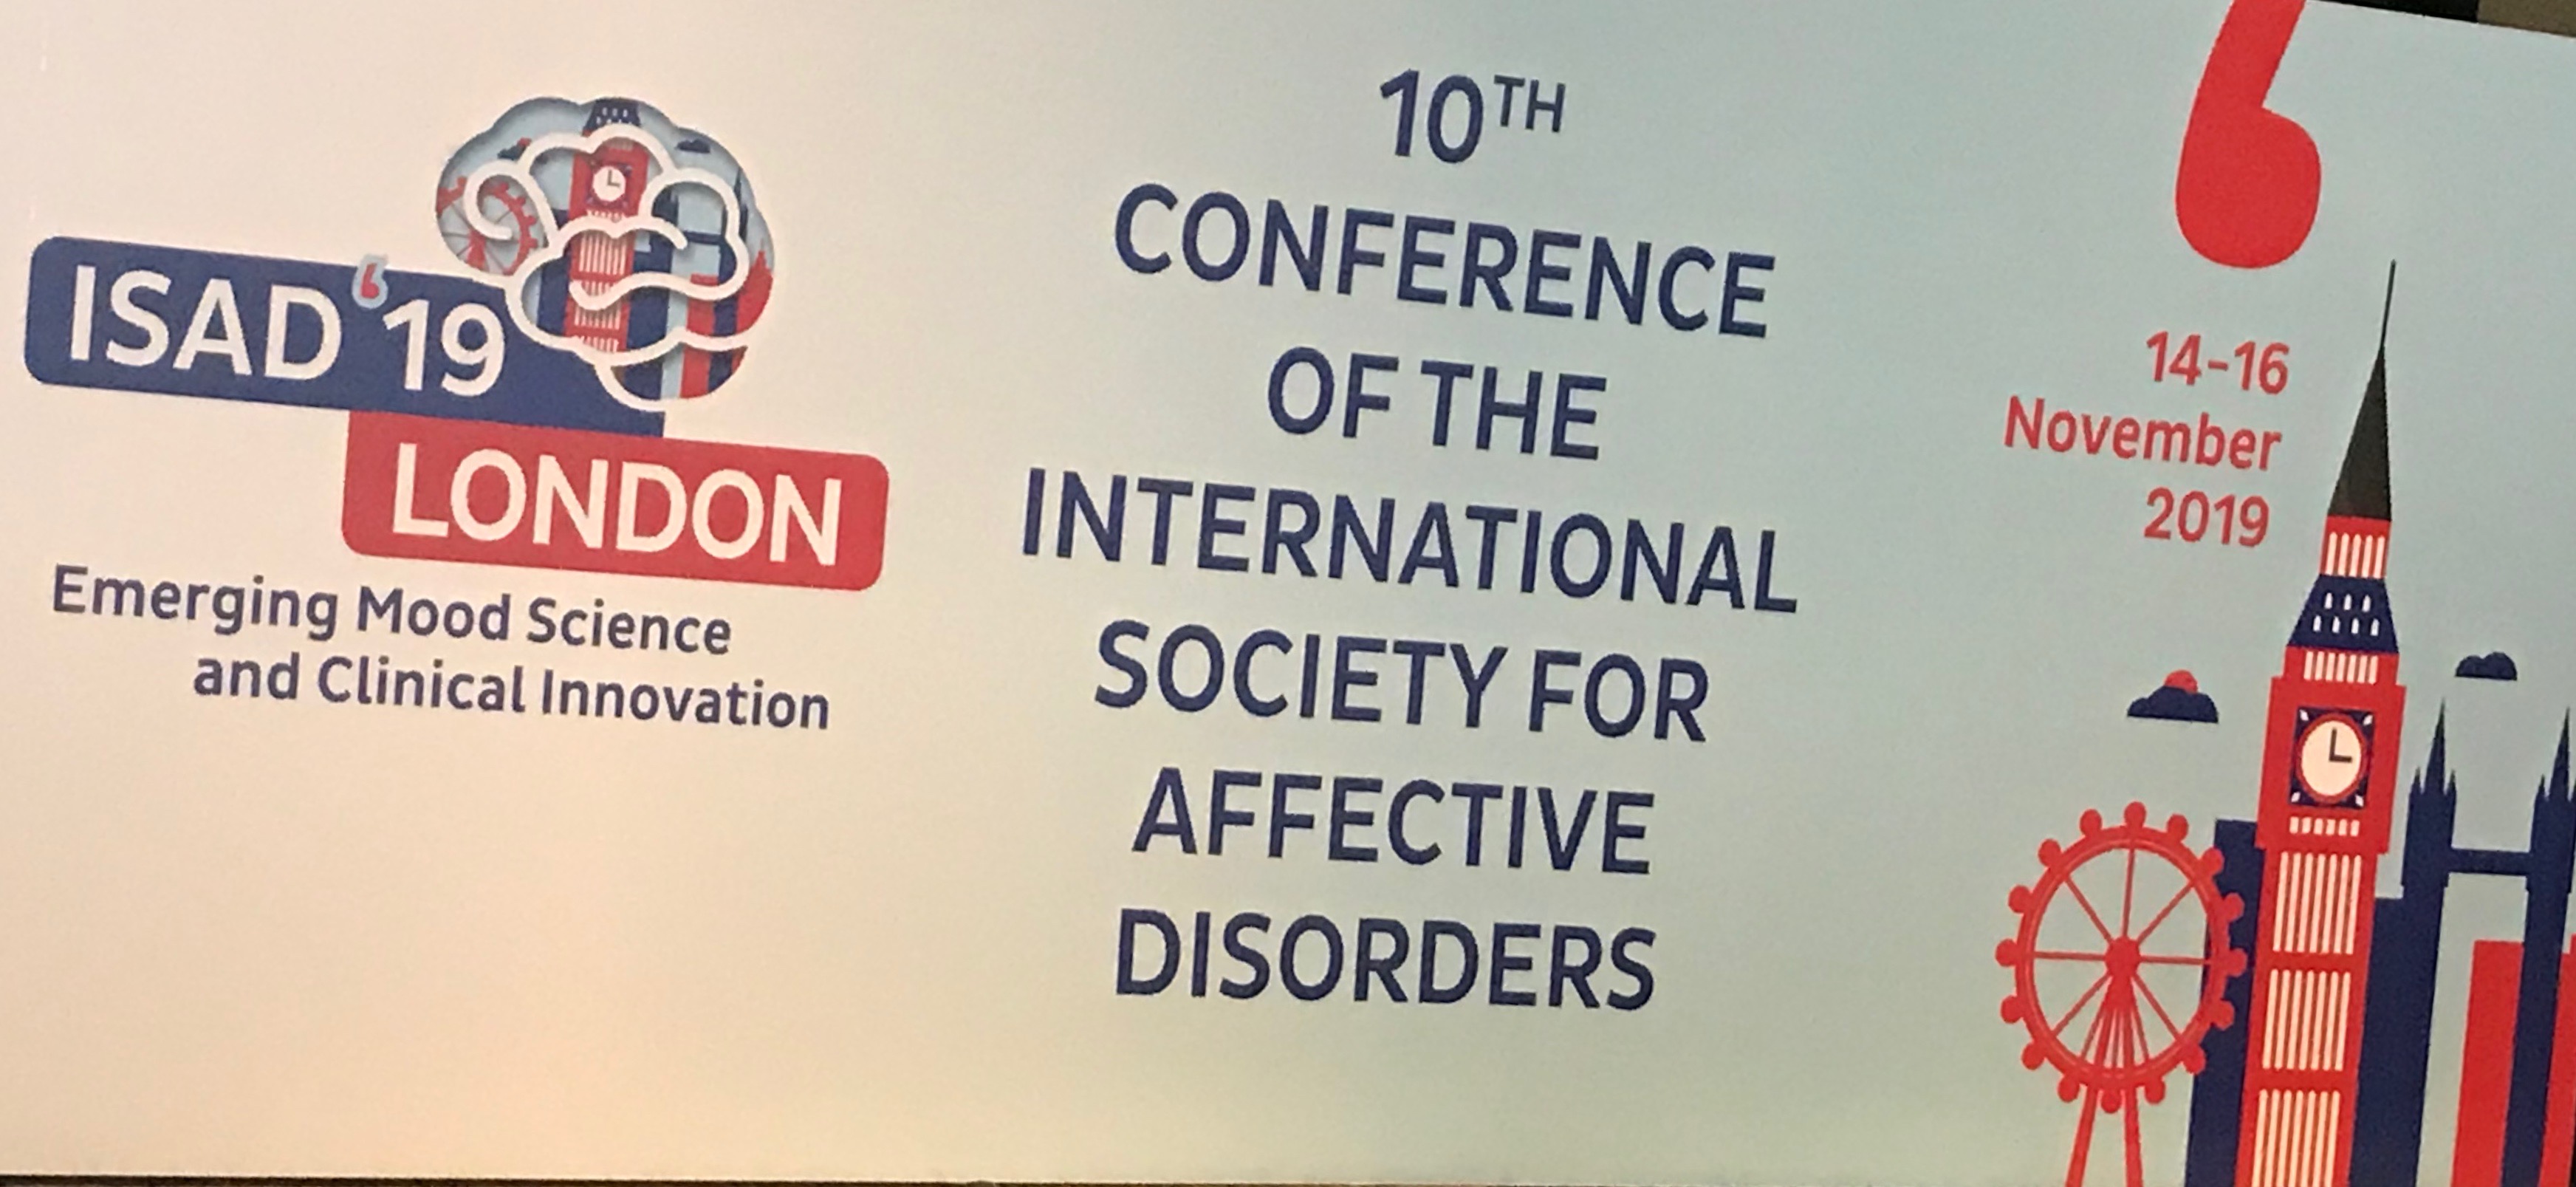 10th Conference of the International Society for Affective Disorders